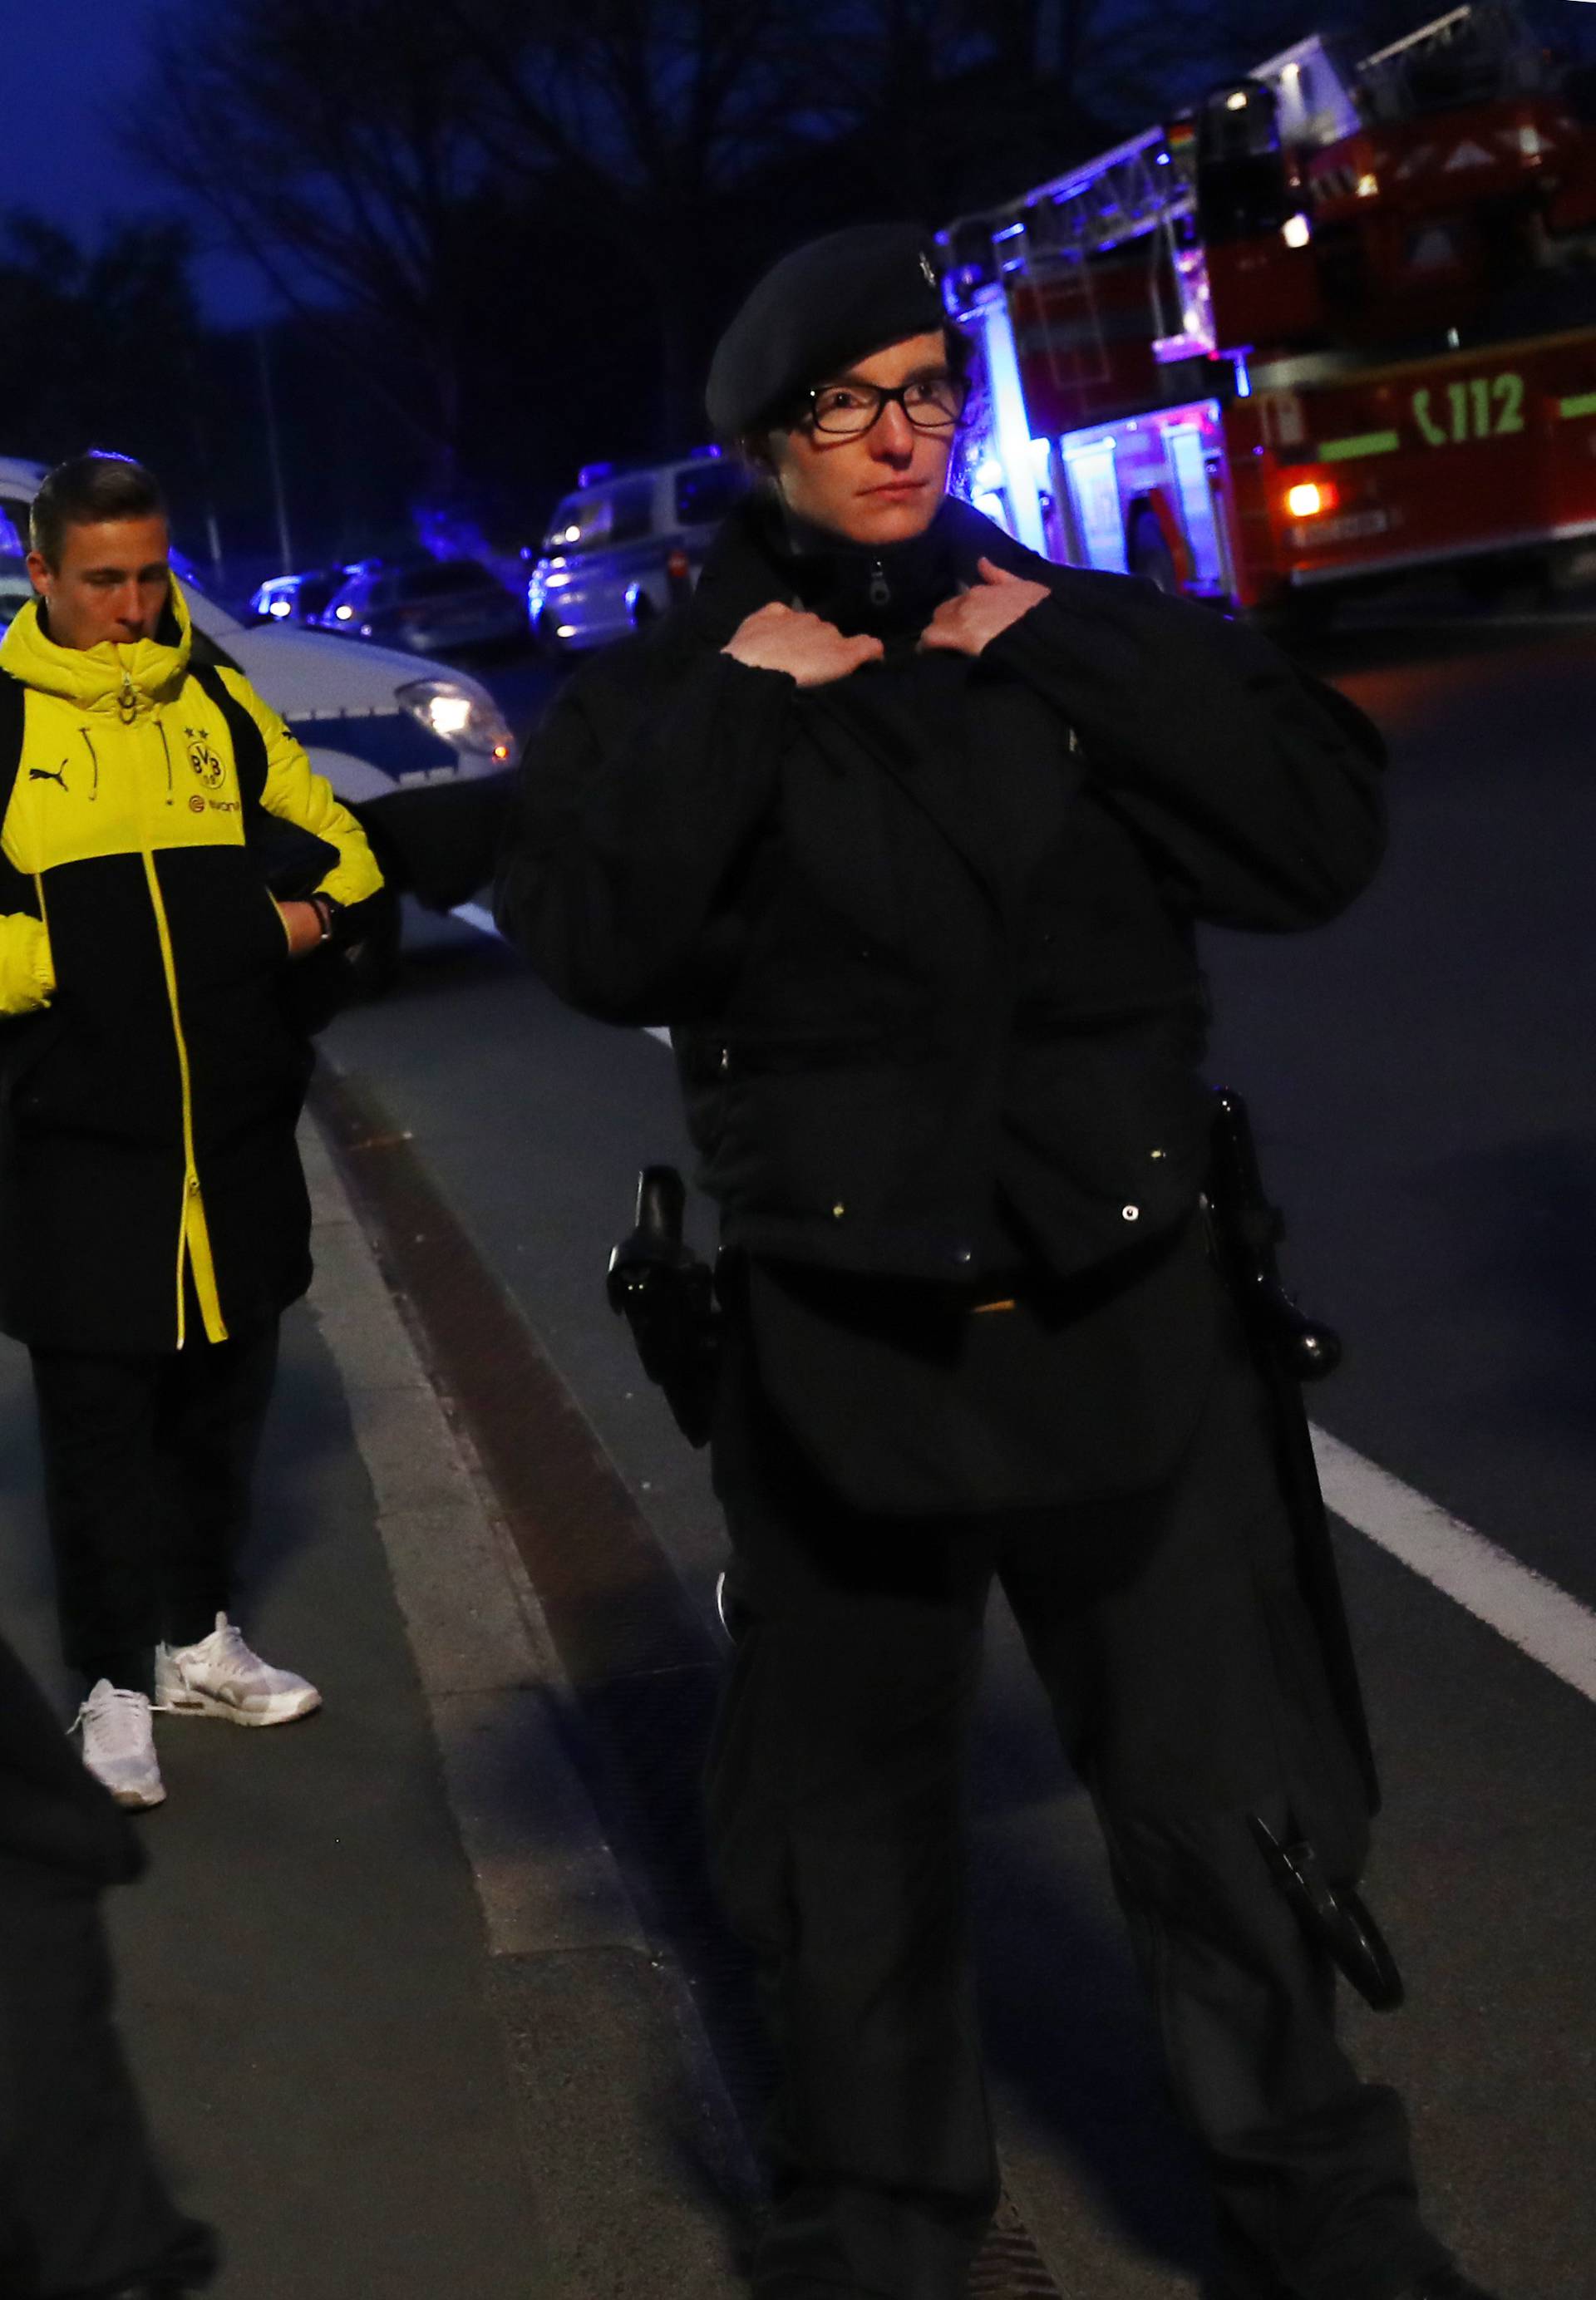 Borussia Dortmund's Felix Passlack with Police after an explosion by the Borussia Dortmund team bus near their hotel before the game